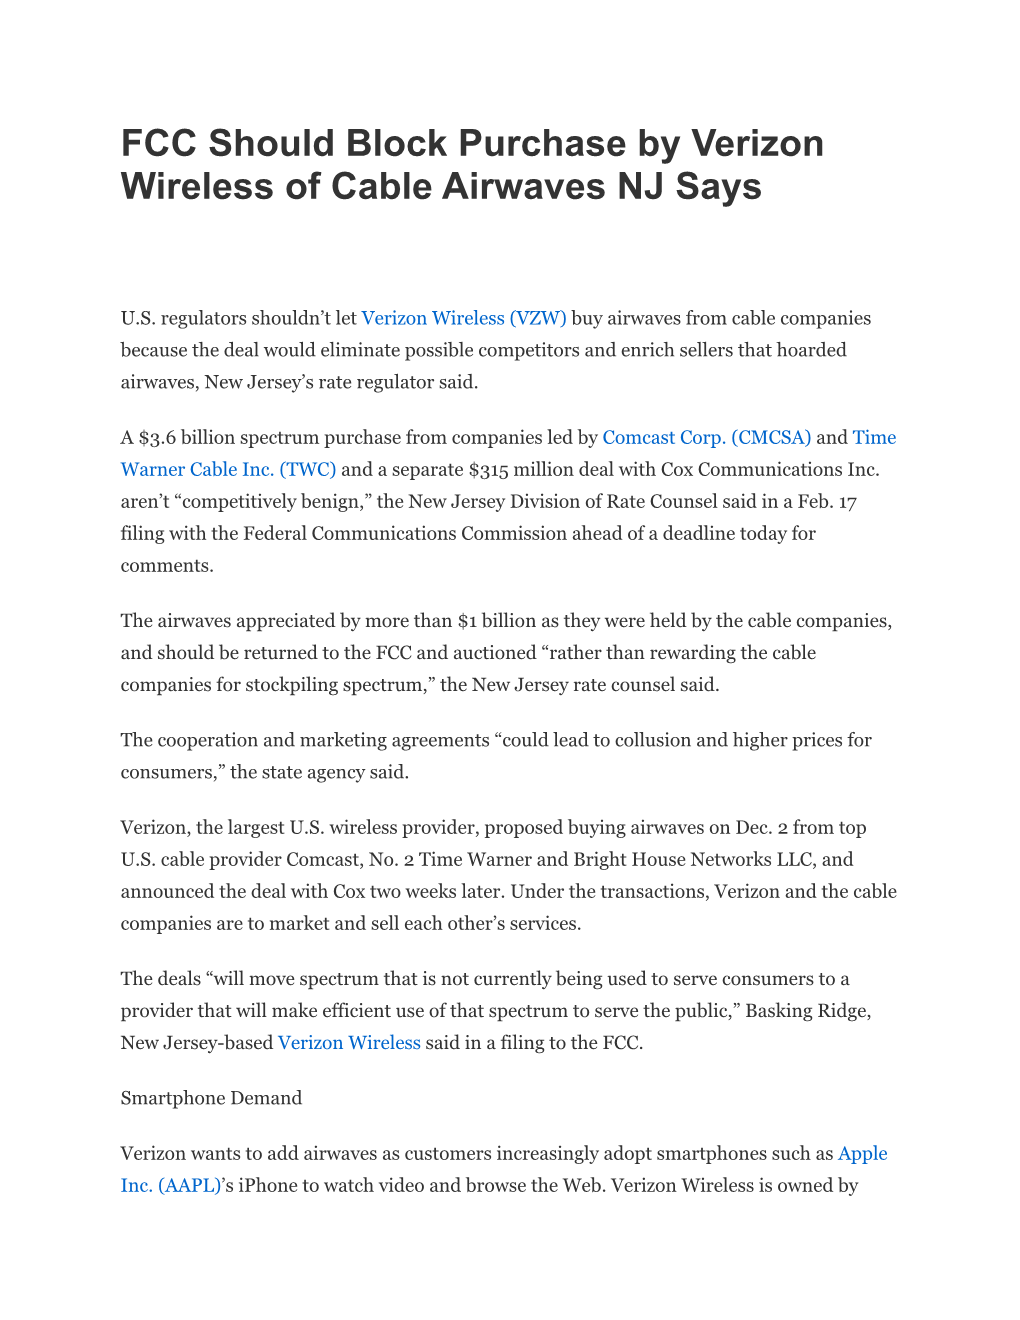 FCC Should Block Purchase by Verizon Wireless of Cable Airwaves NJ Says